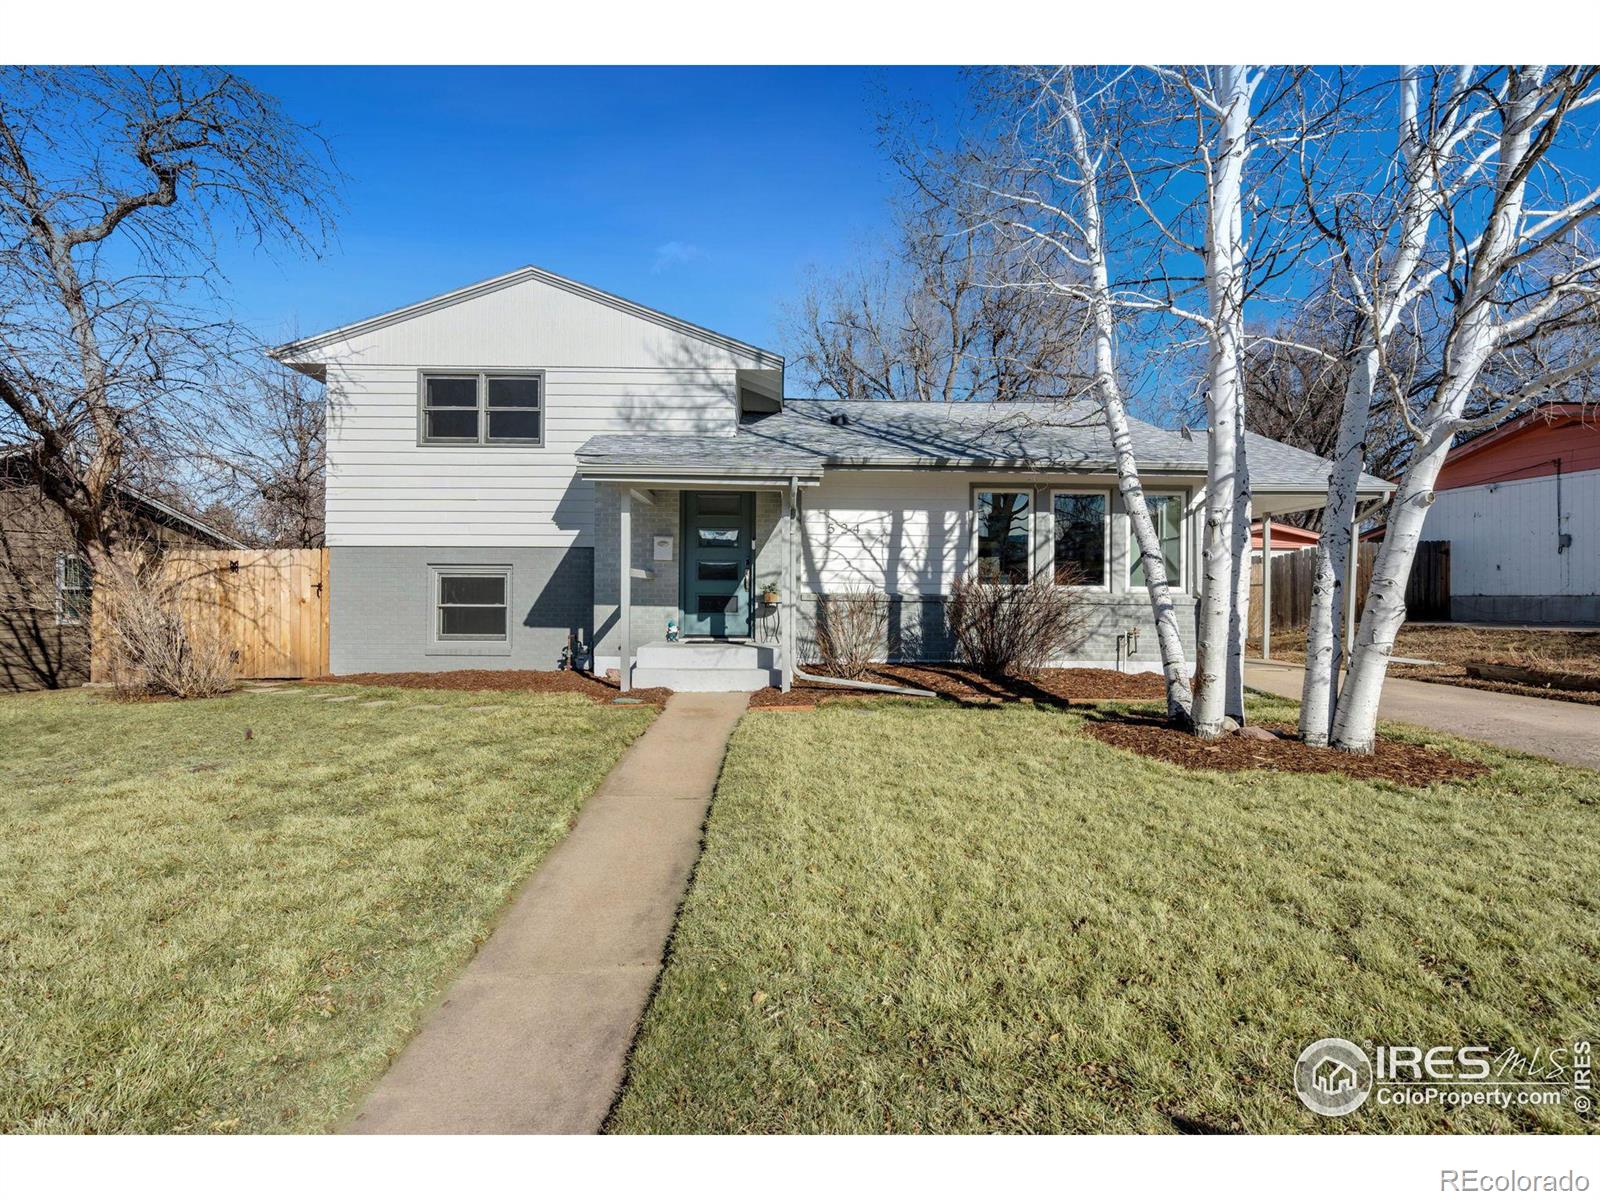 Report Image for 524  Crestmore Place,Fort Collins, Colorado